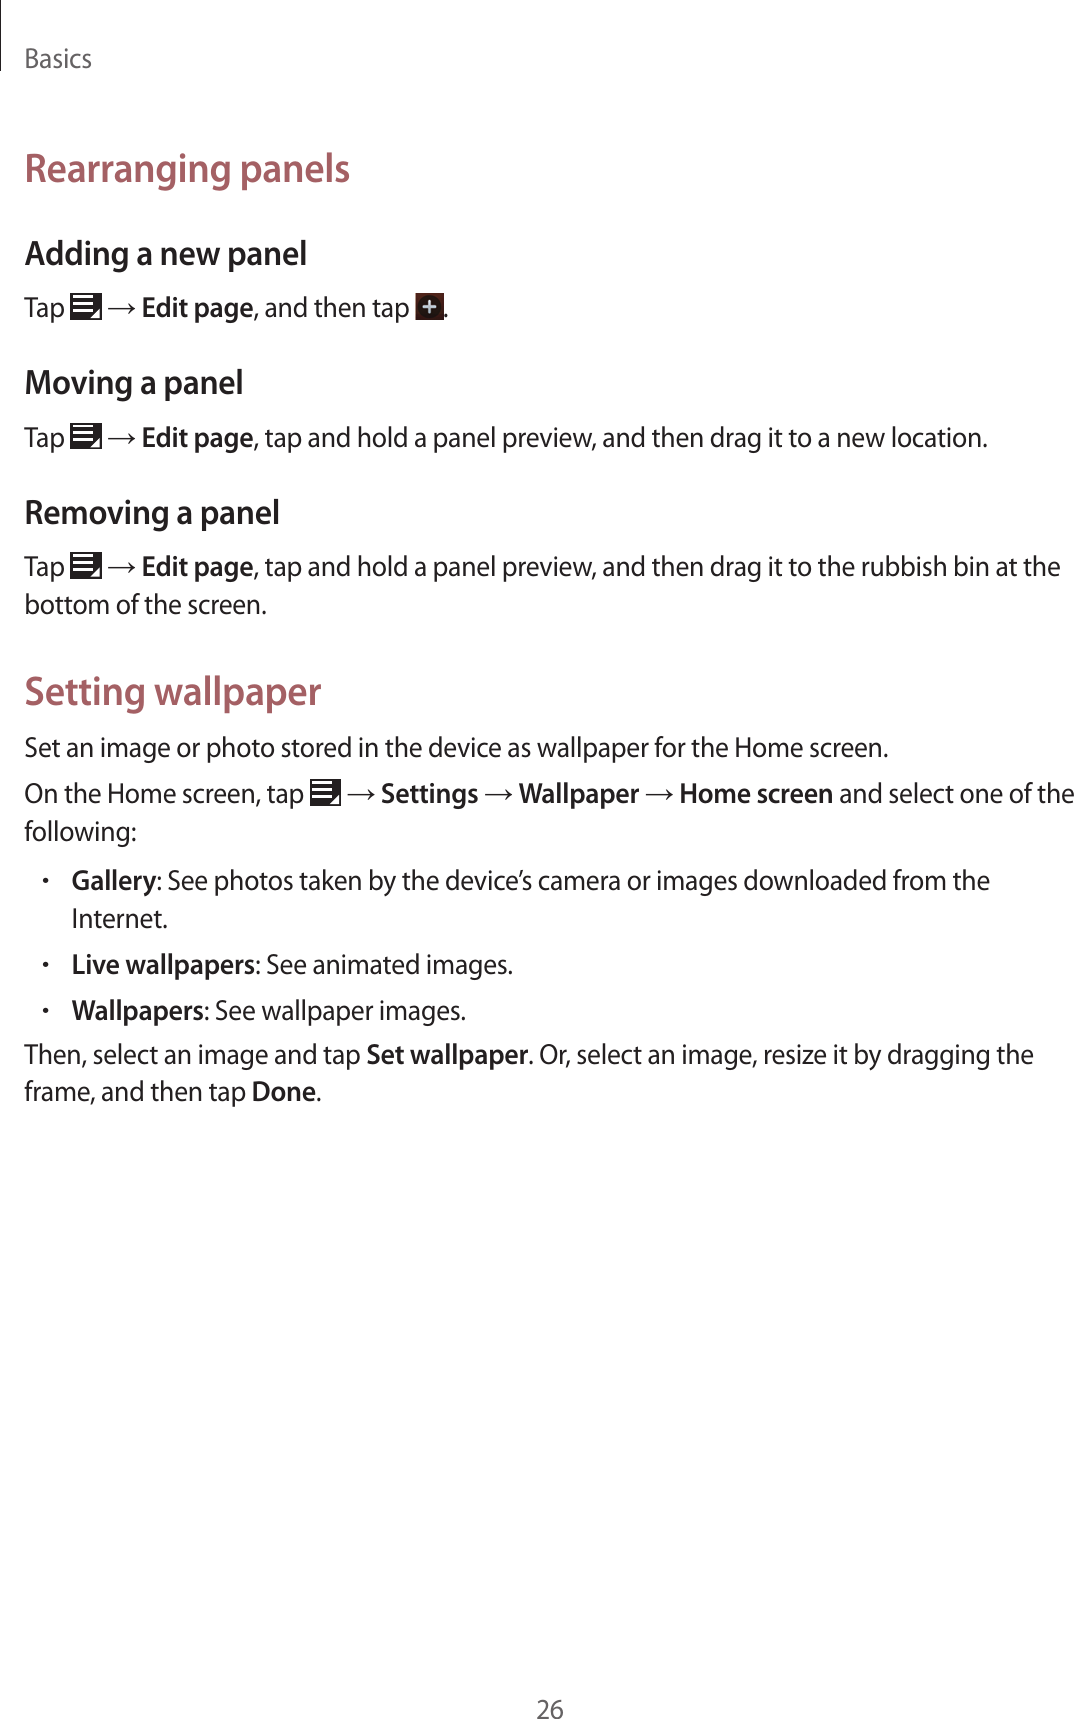 Basics26Rearranging panelsAdding a new panelTap   → Edit page, and then tap  .Moving a panelTap   → Edit page, tap and hold a panel preview, and then drag it to a new location.Removing a panelTap   → Edit page, tap and hold a panel preview, and then drag it to the rubbish bin at the bottom of the screen.Setting wallpaperSet an image or photo stored in the device as wallpaper for the Home screen.On the Home screen, tap   → Settings → Wallpaper → Home screen and select one of the following:•Gallery: See photos taken by the device’s camera or images downloaded from the Internet.•Live wallpapers: See animated images.•Wallpapers: See wallpaper images.Then, select an image and tap Set wallpaper. Or, select an image, resize it by dragging the frame, and then tap Done.